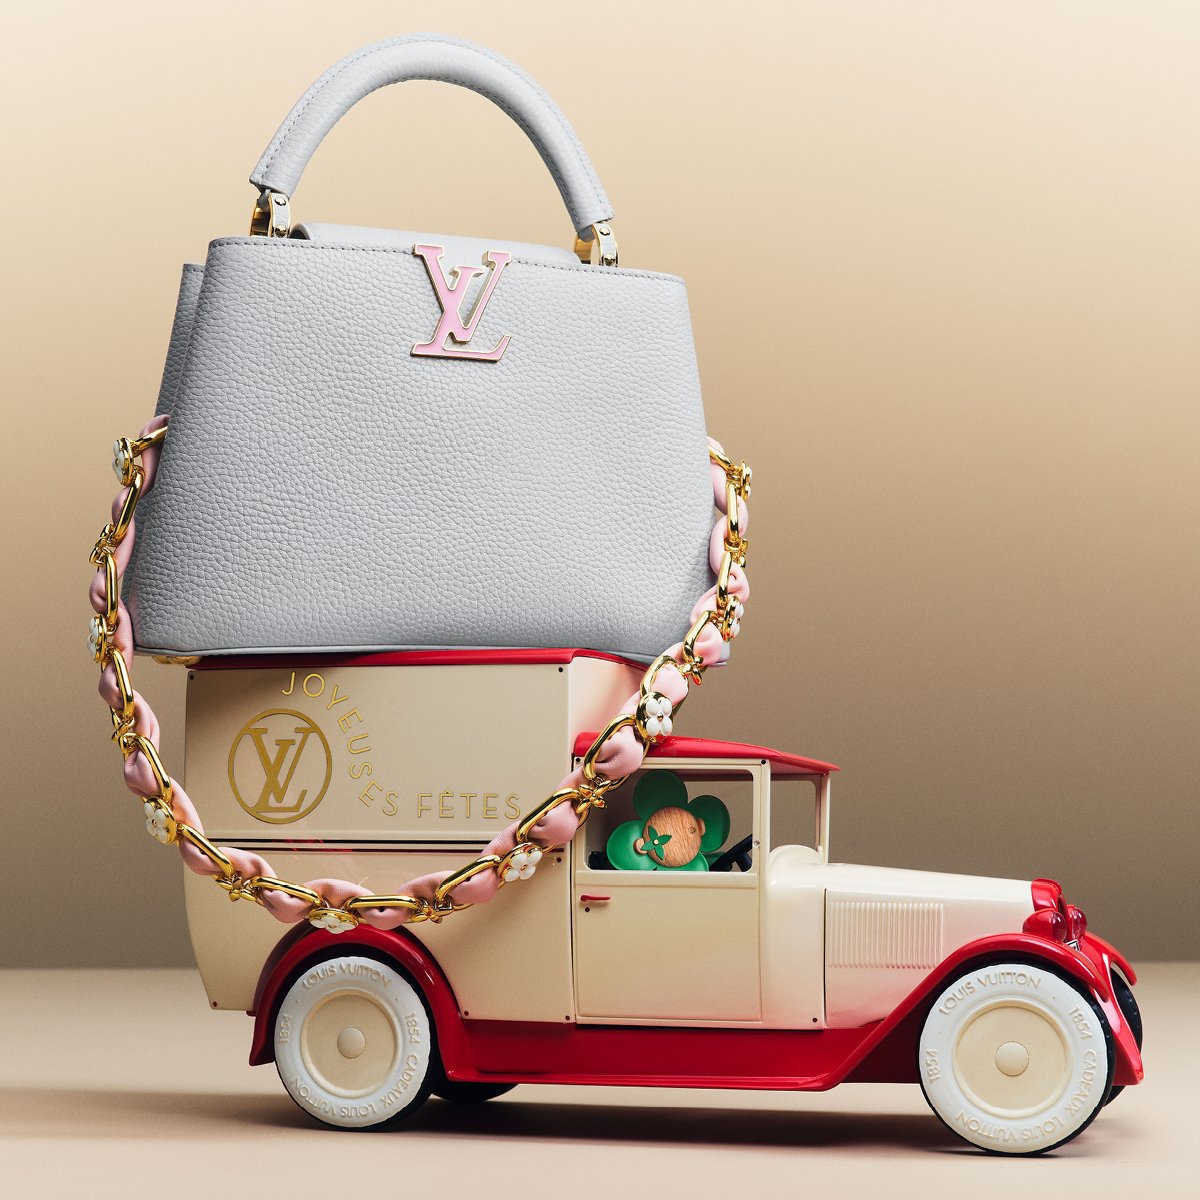 Discover LOUIS VUITTON LV By The Pool Collection